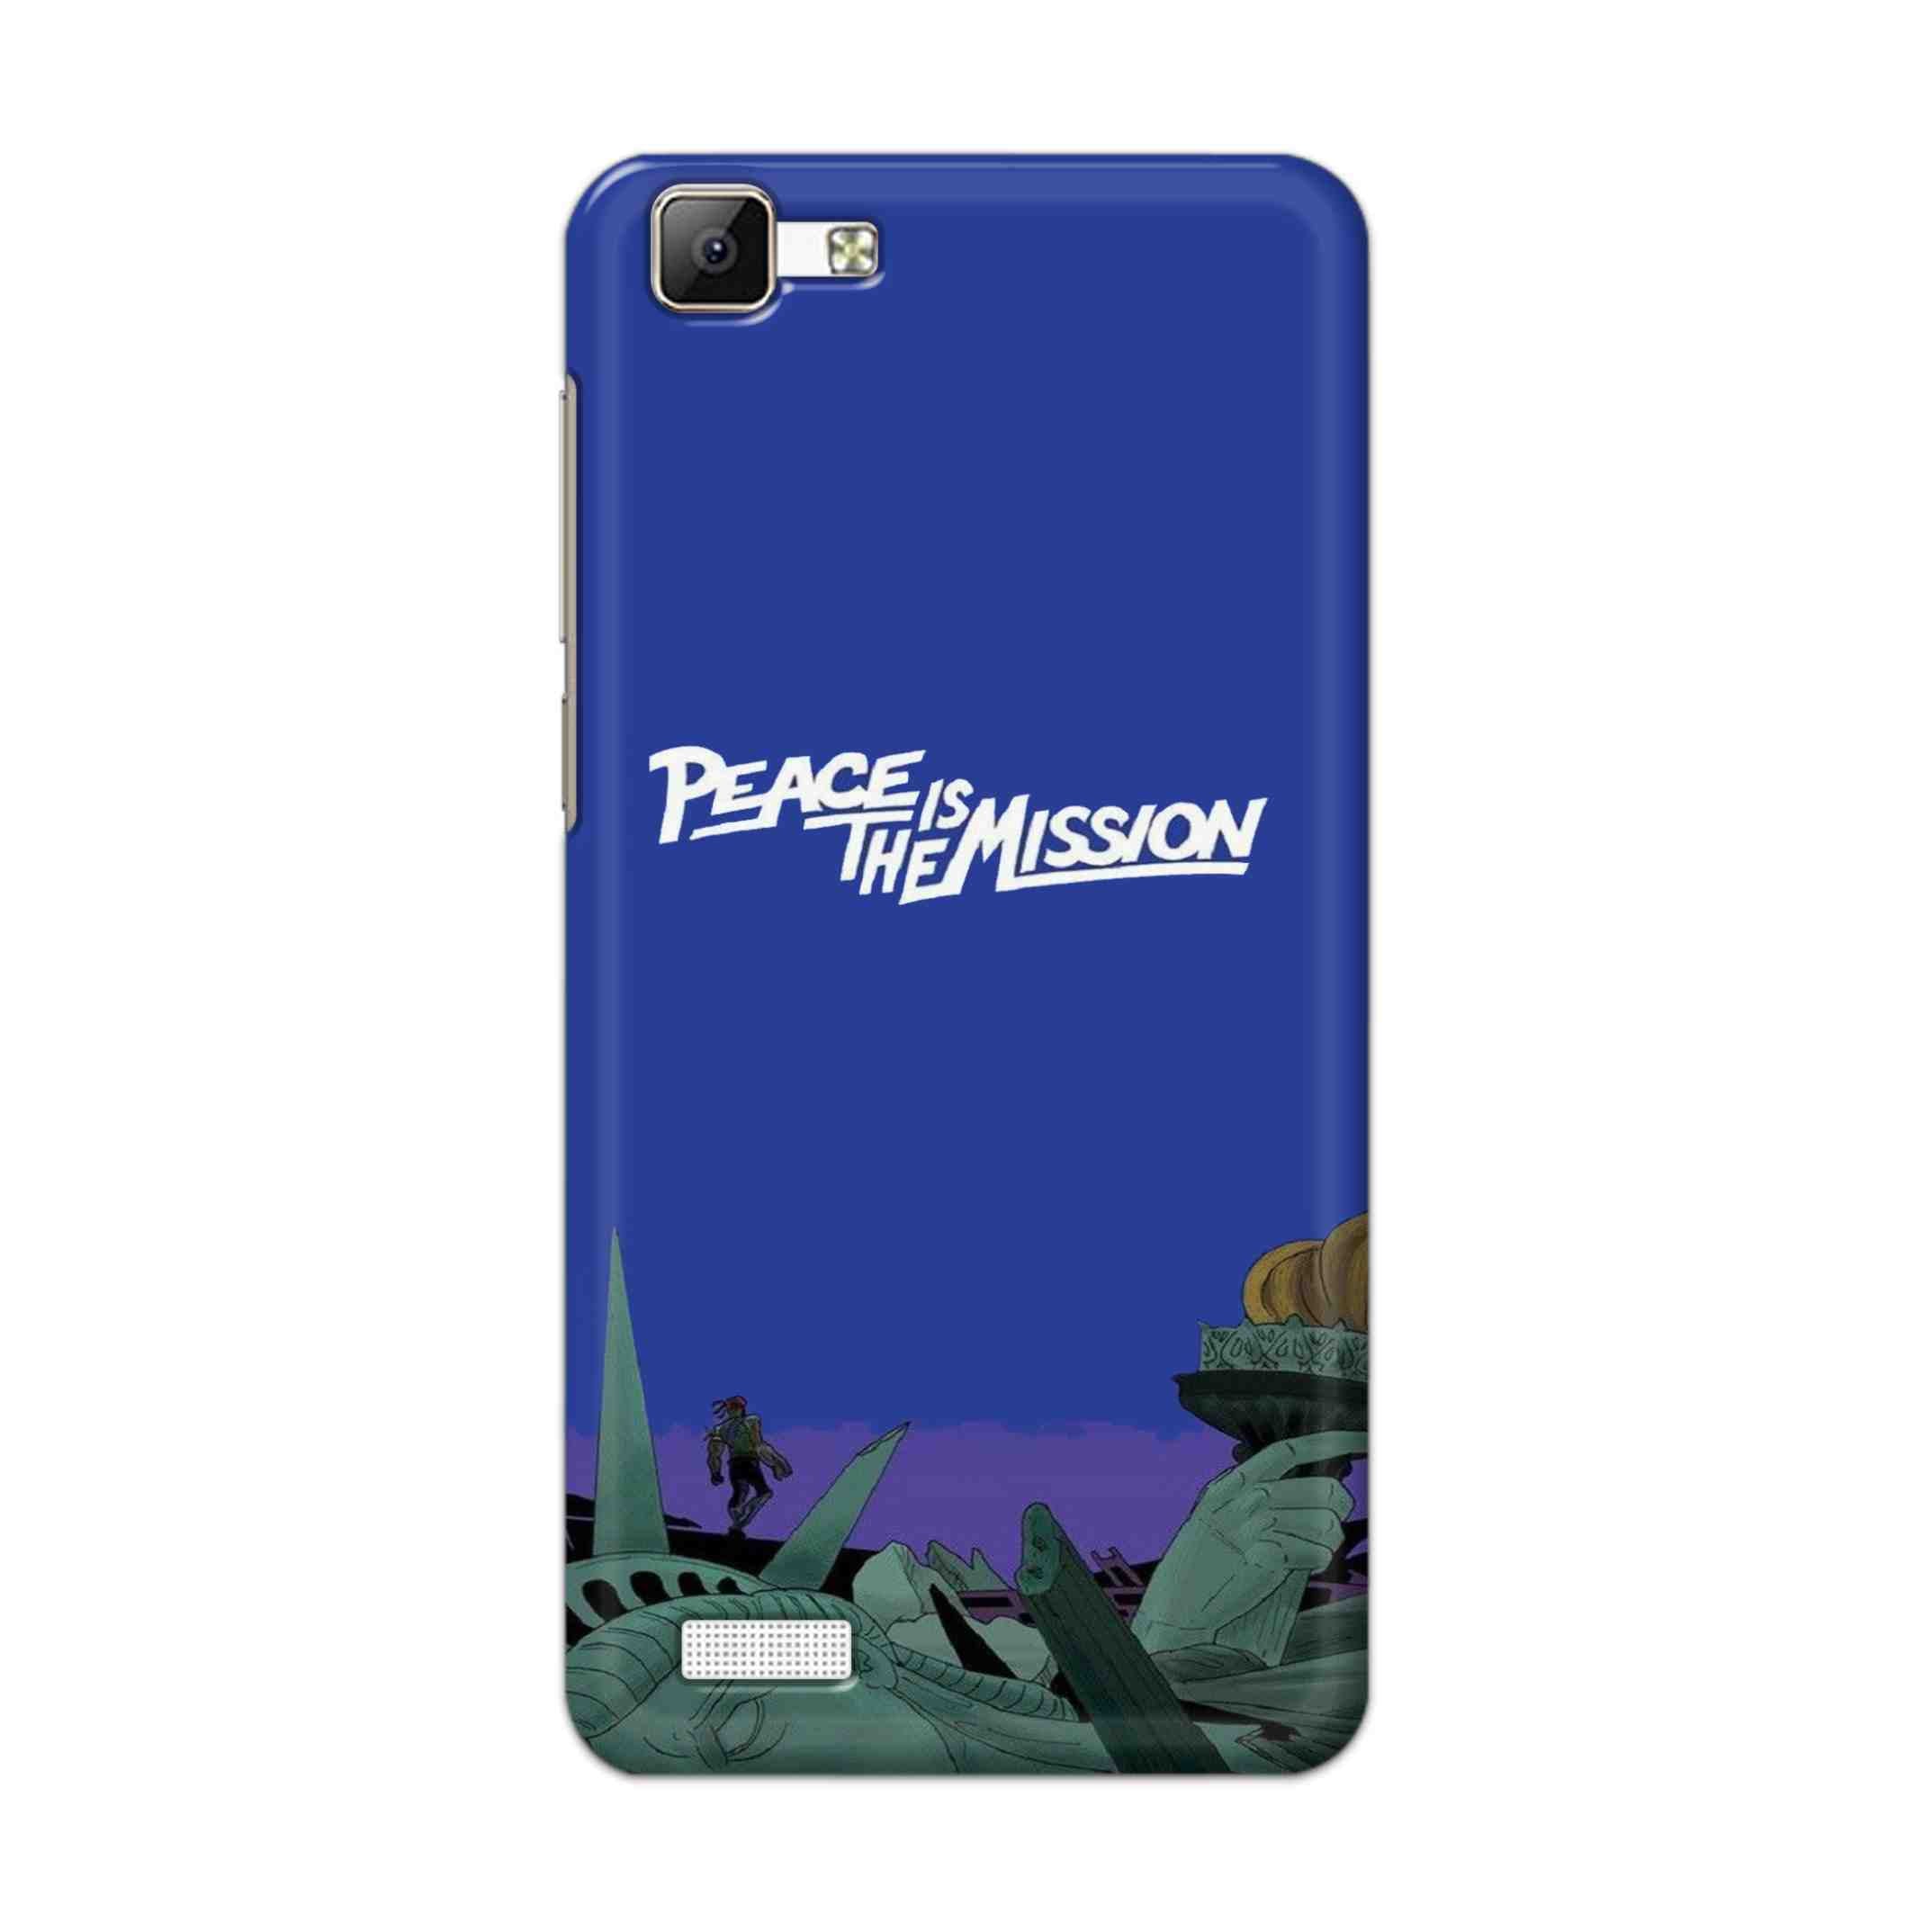 Buy Peace Is The Misson Hard Back Mobile Phone Case Cover For Vivo Y35 Online